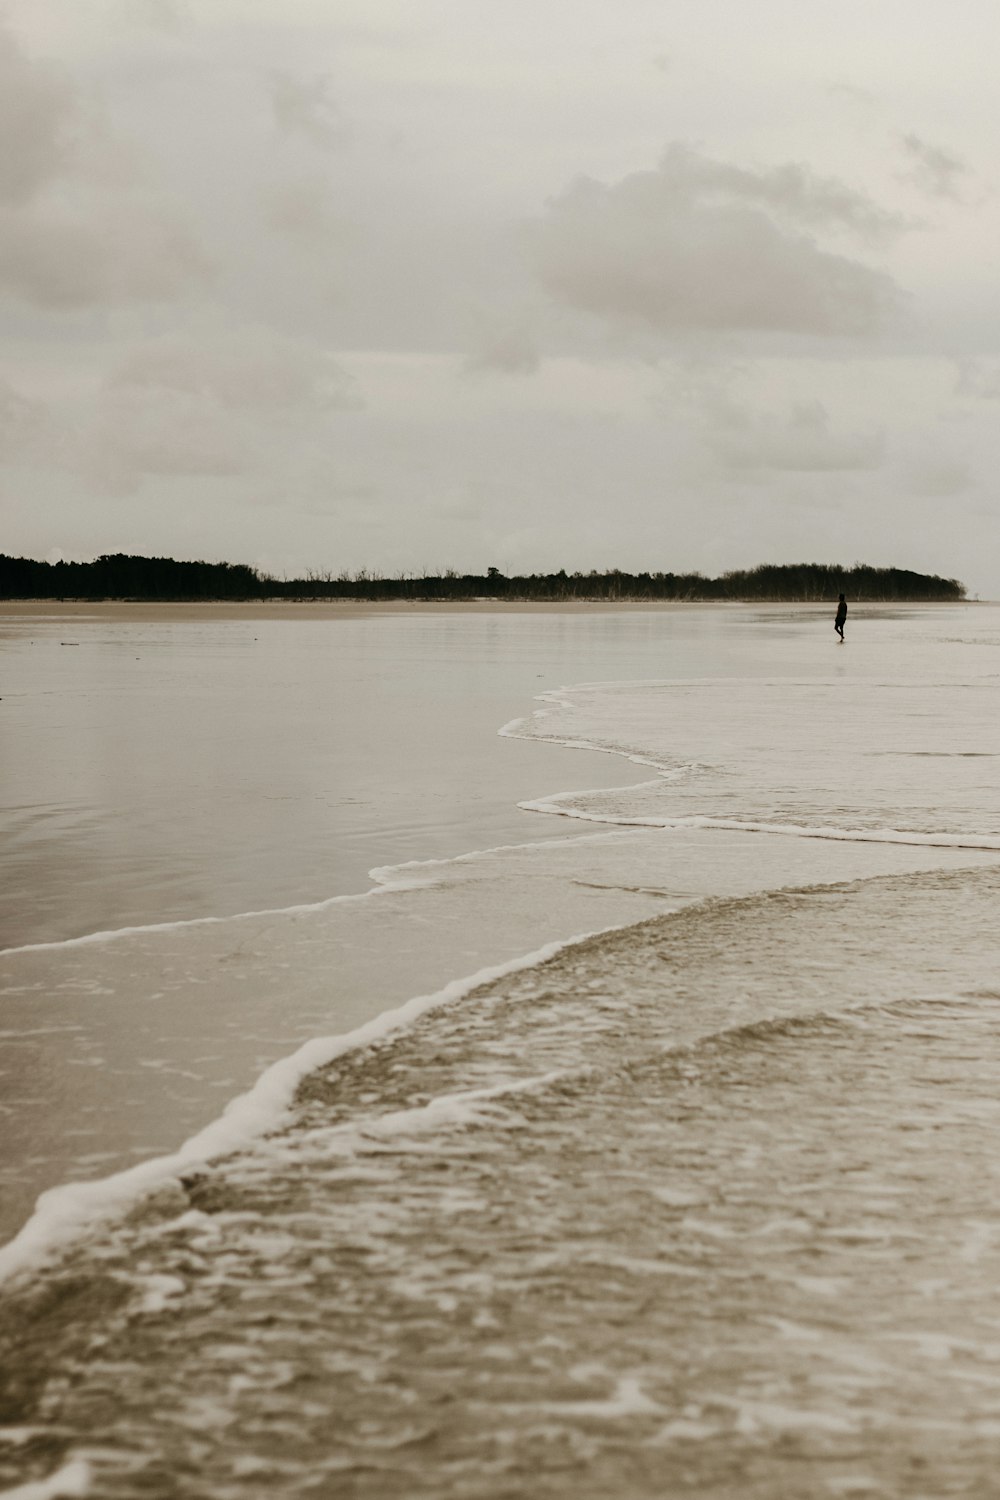 a person walking on the beach with a surfboard